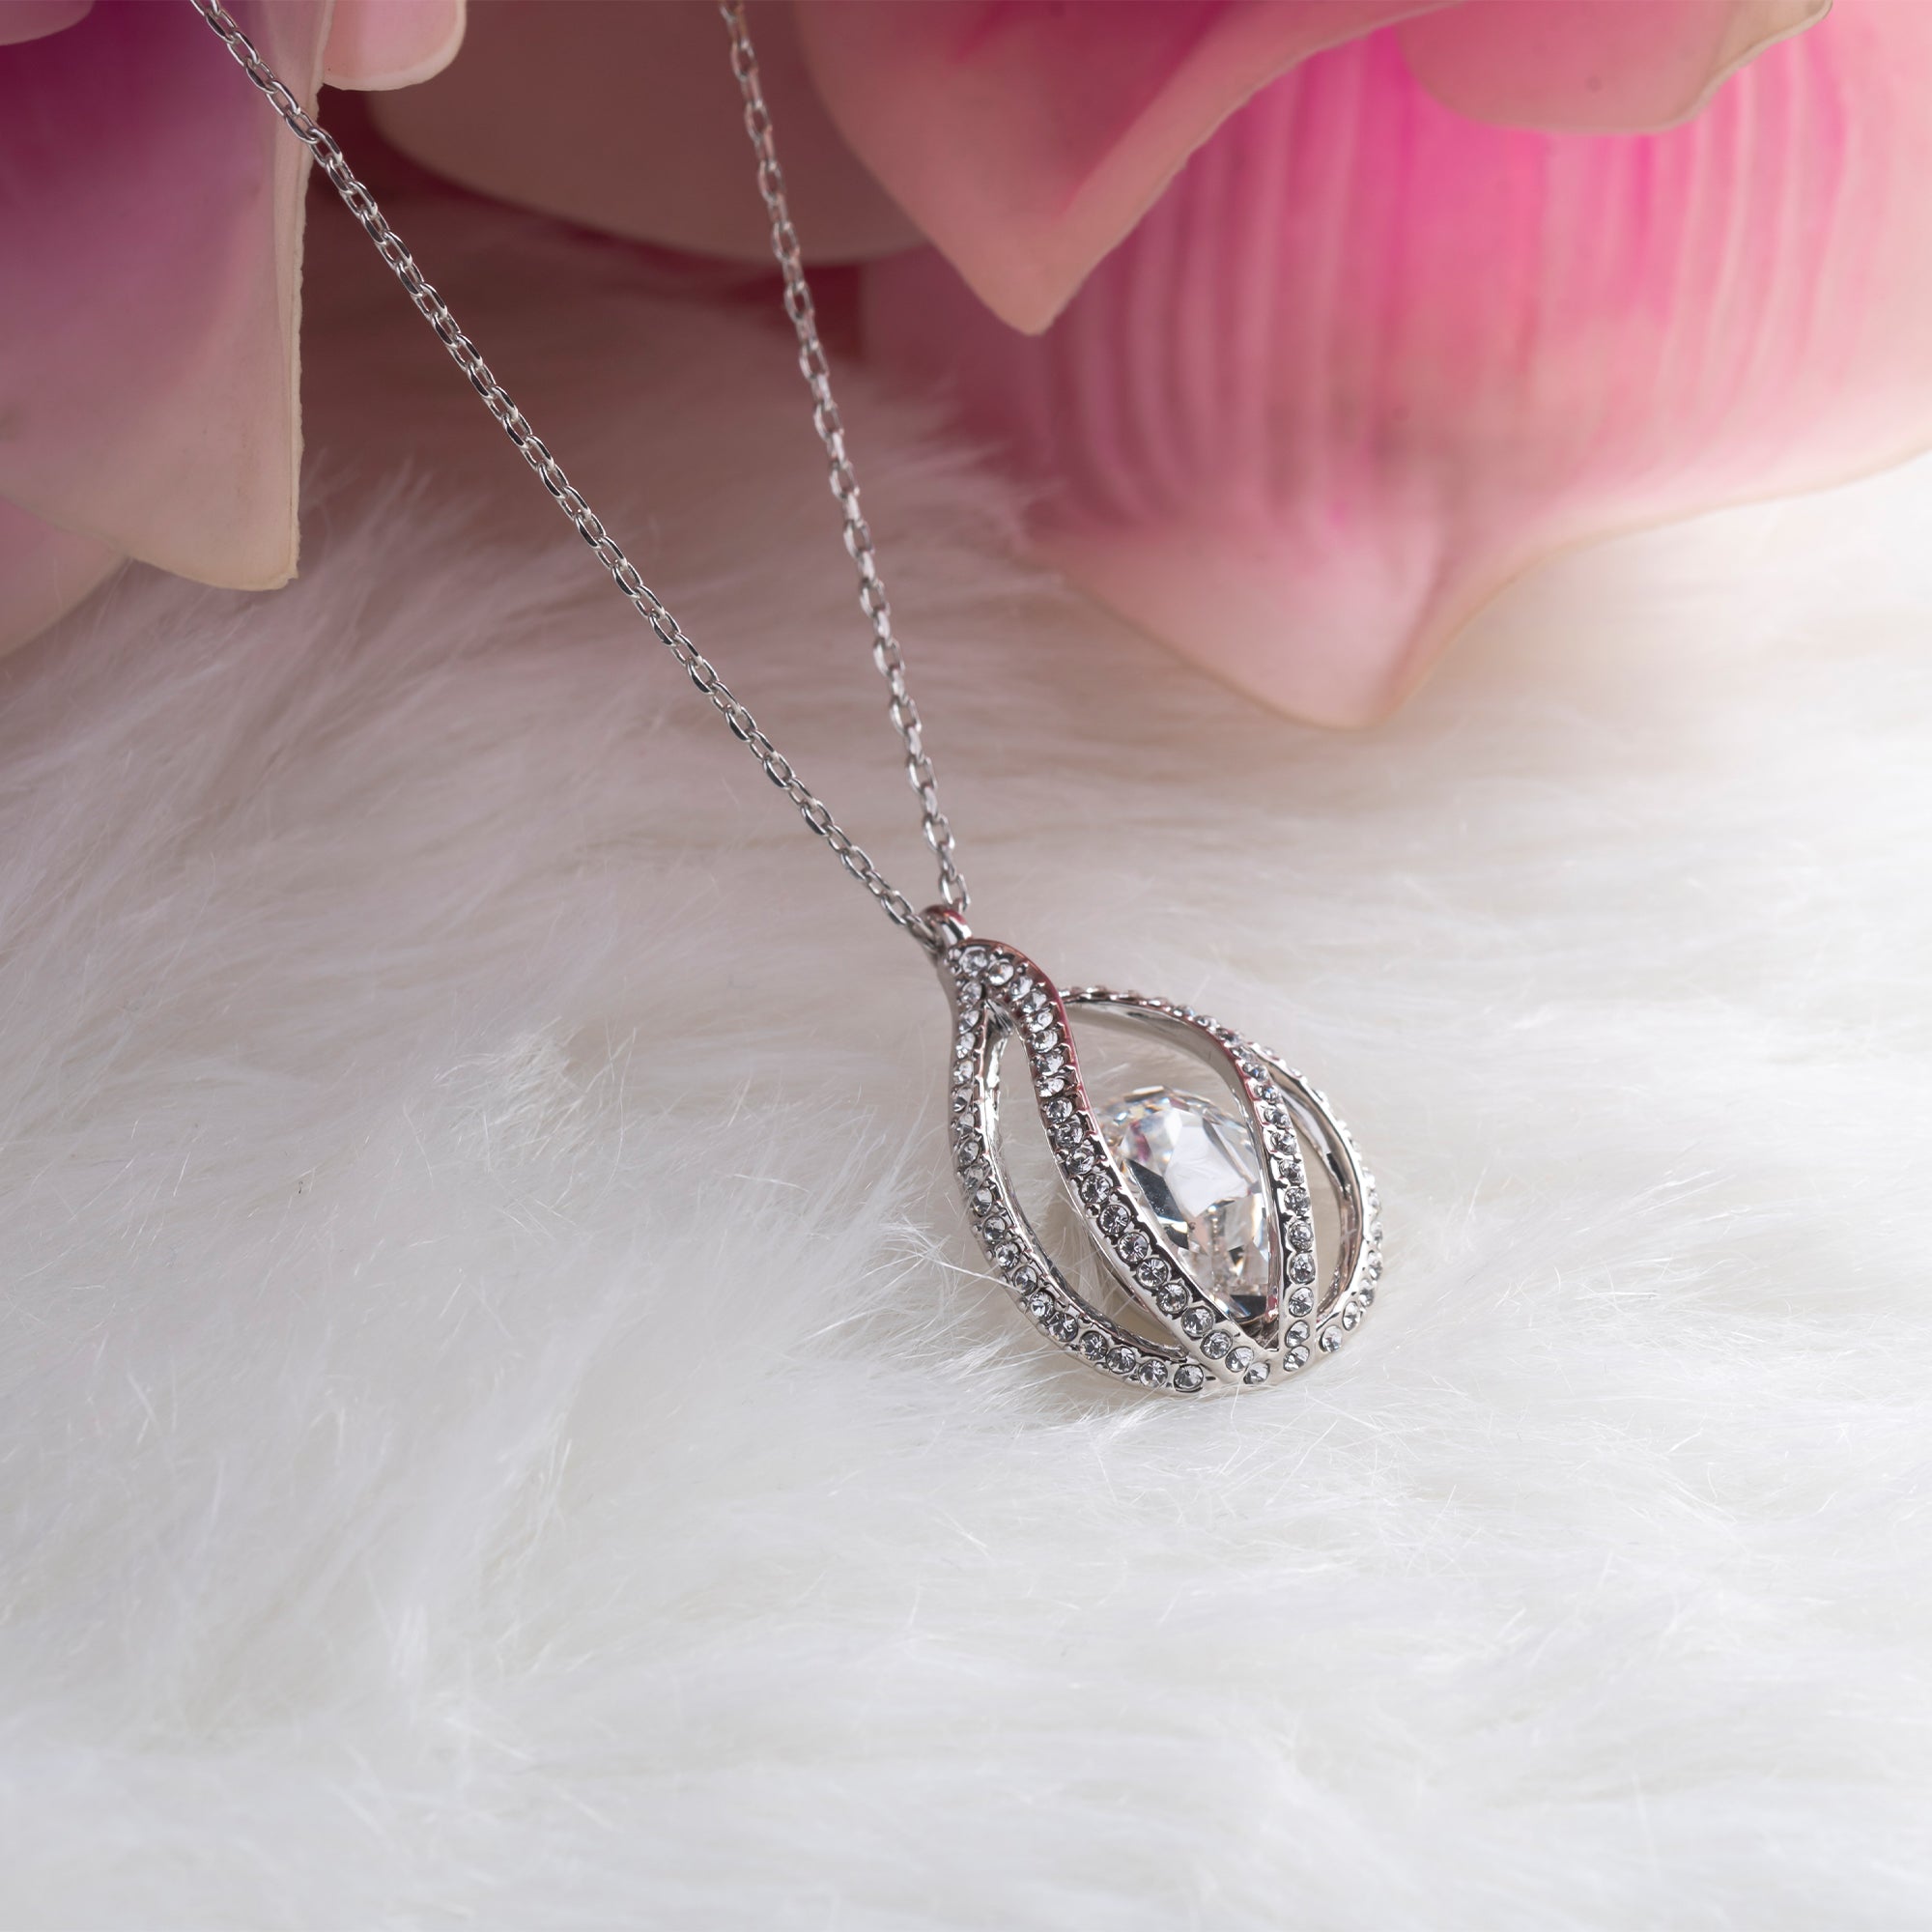 TRYNDI™ Gift For Graduate Birdcage Necklace With Authentic Swarovski Crystals